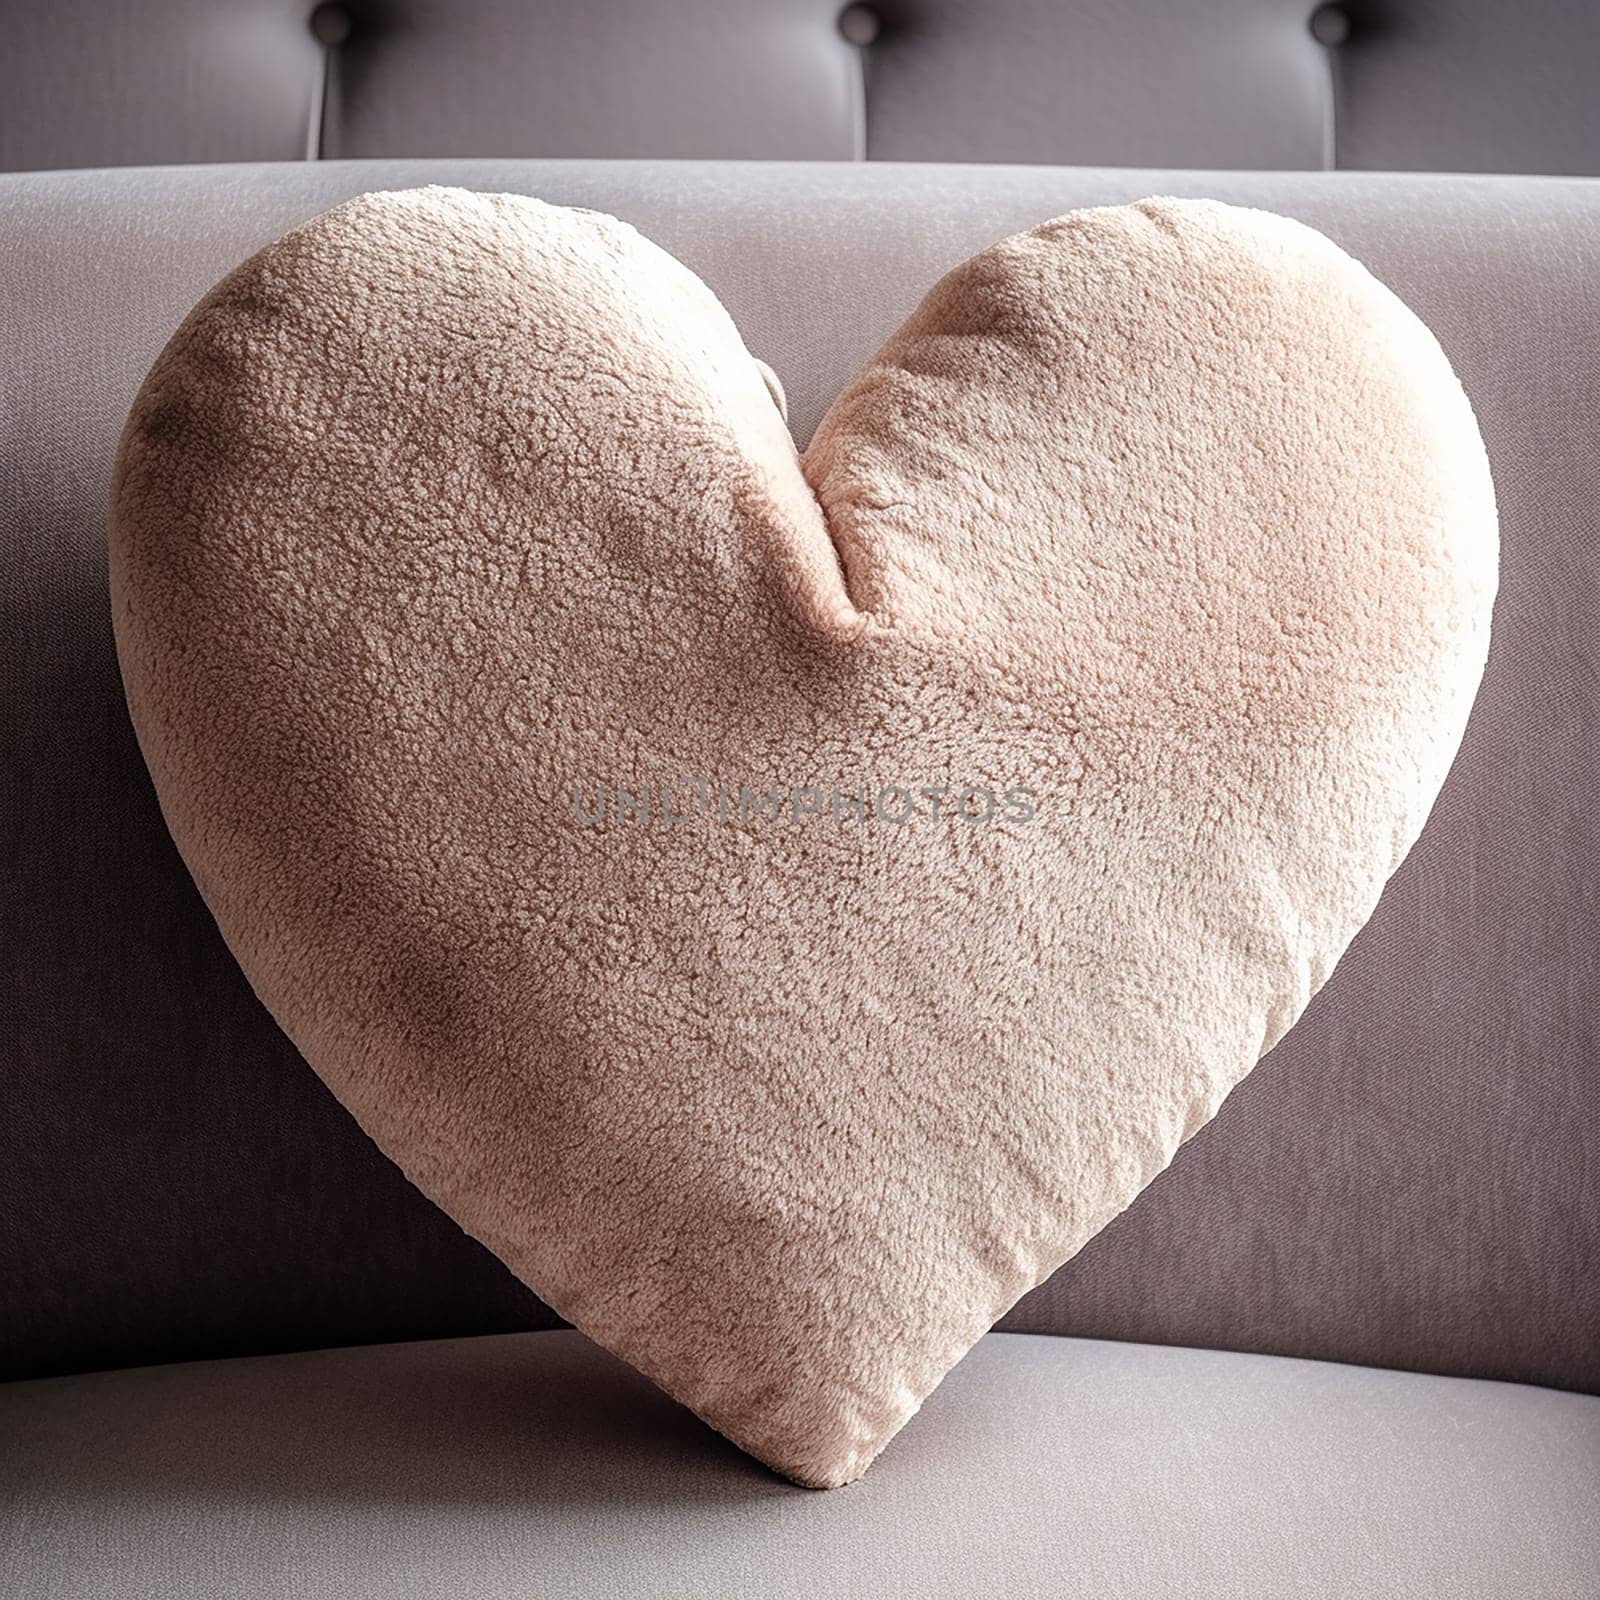 Plush heart-shaped pillow on a gray couch. by Hype2art